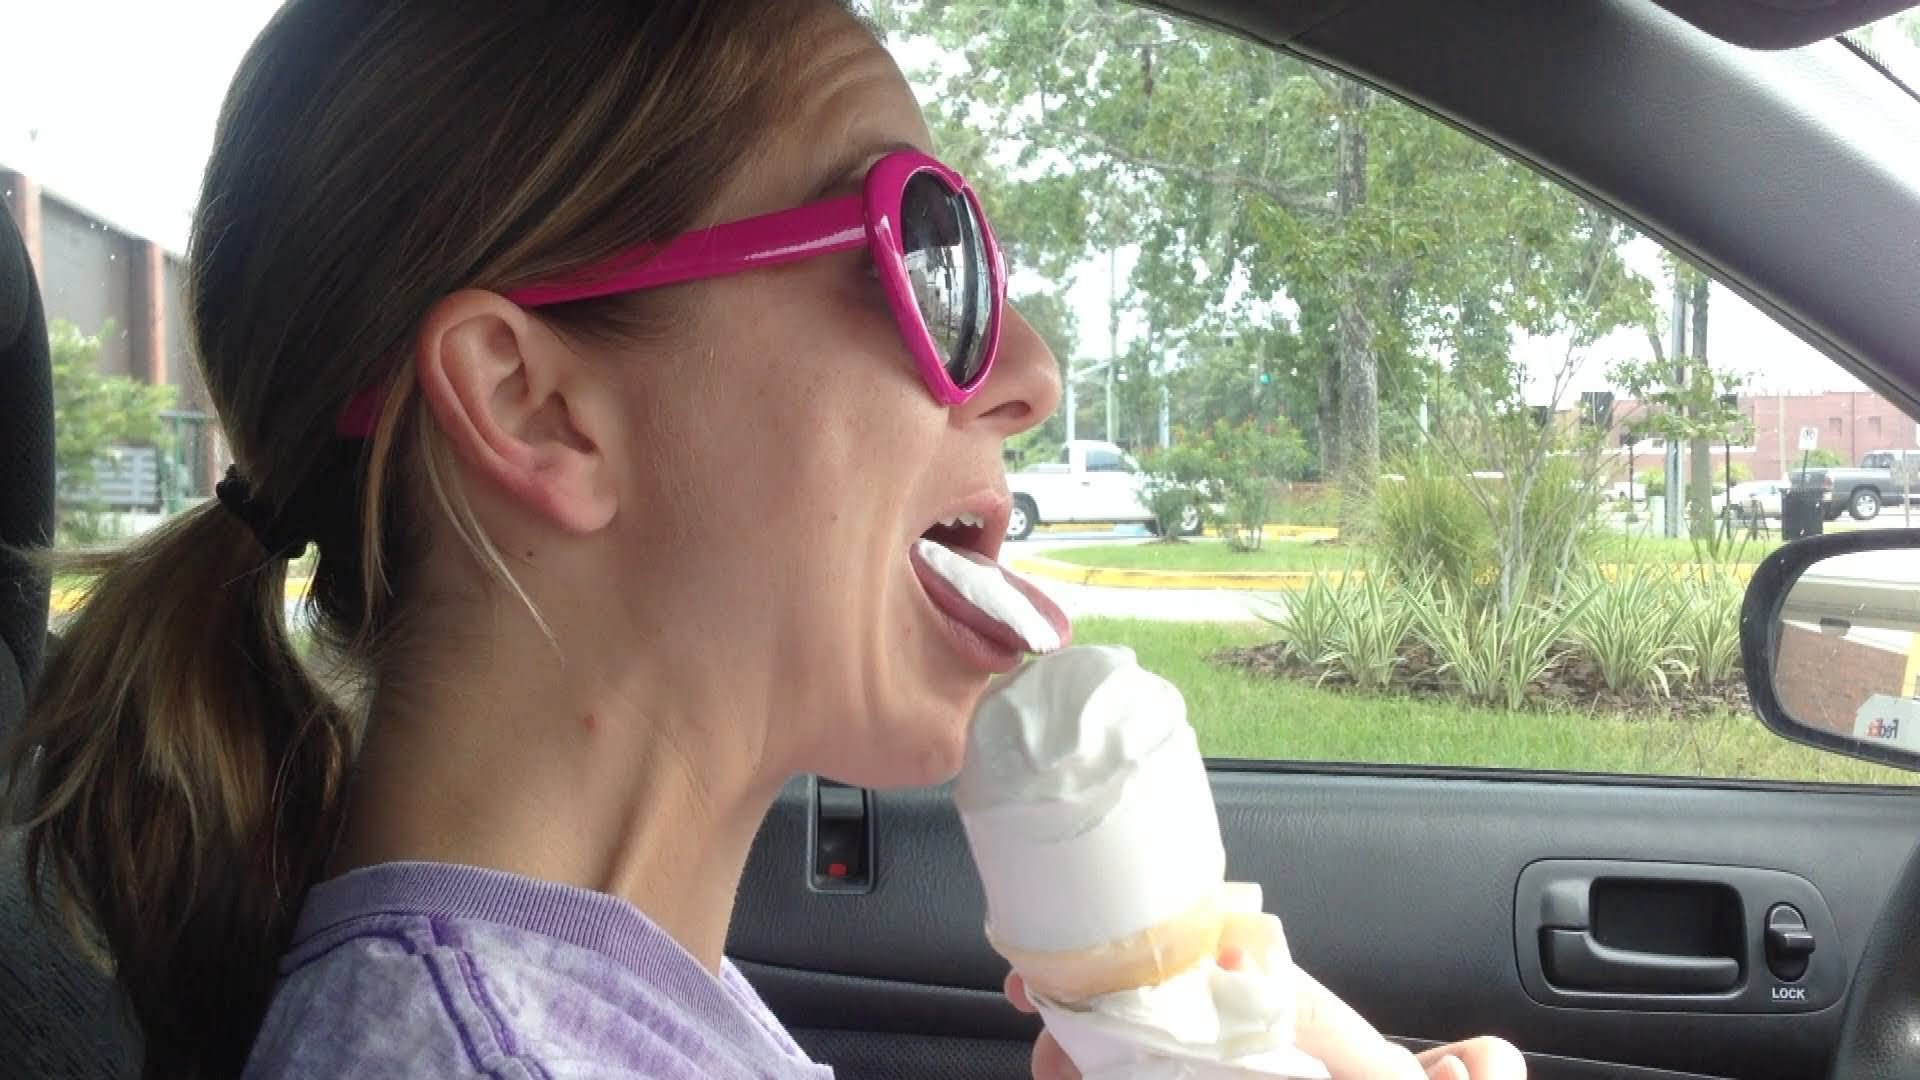 Licking Ice Cream Cone Funny Face Girl Image